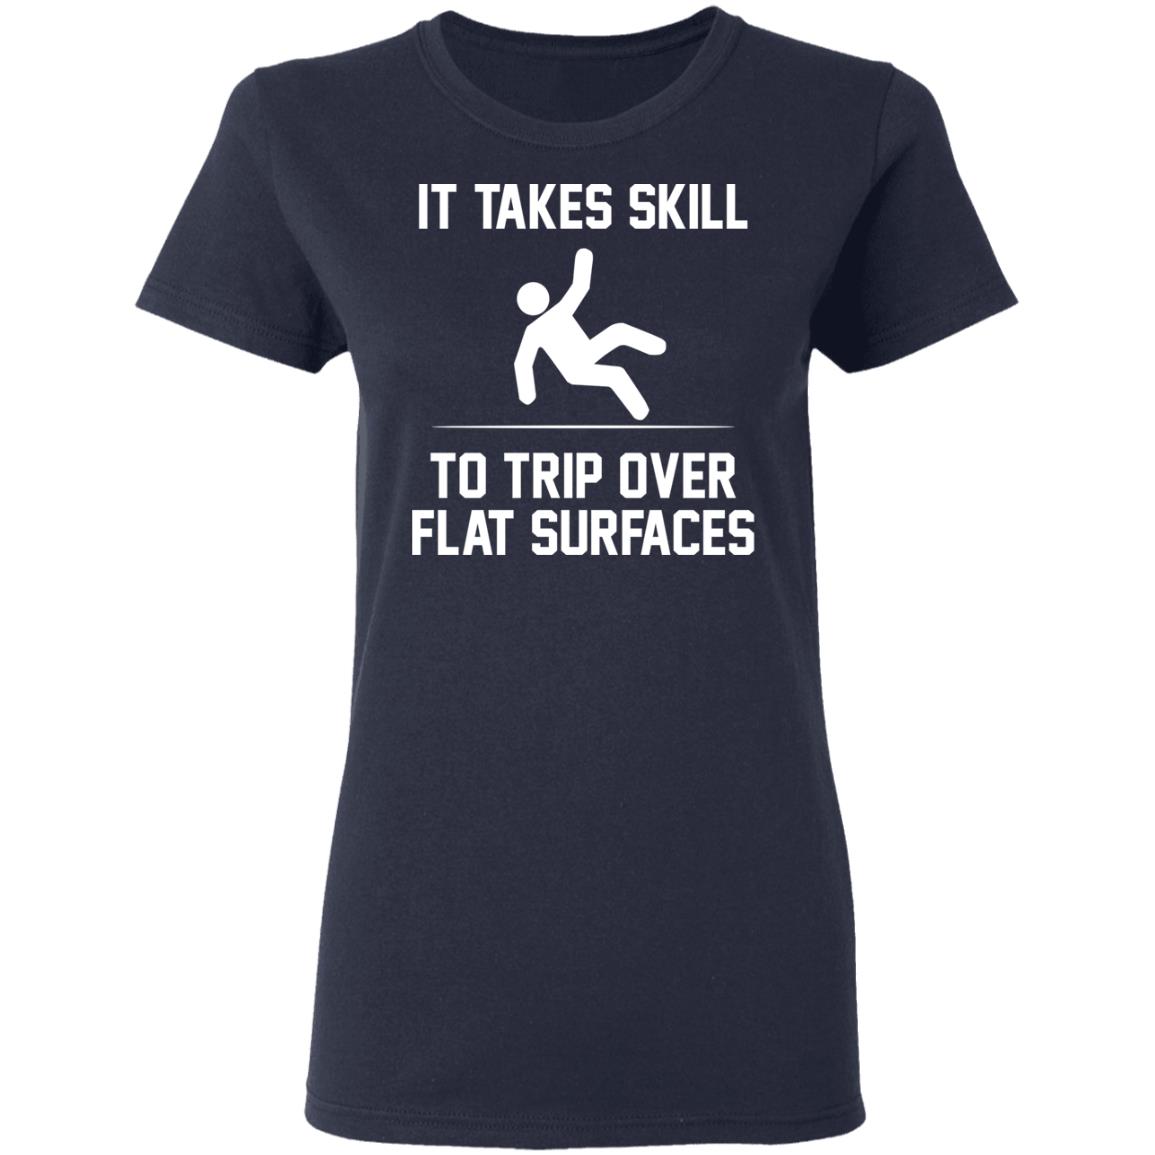 It takes skill to trip over flat surfaces shirt - Rockatee